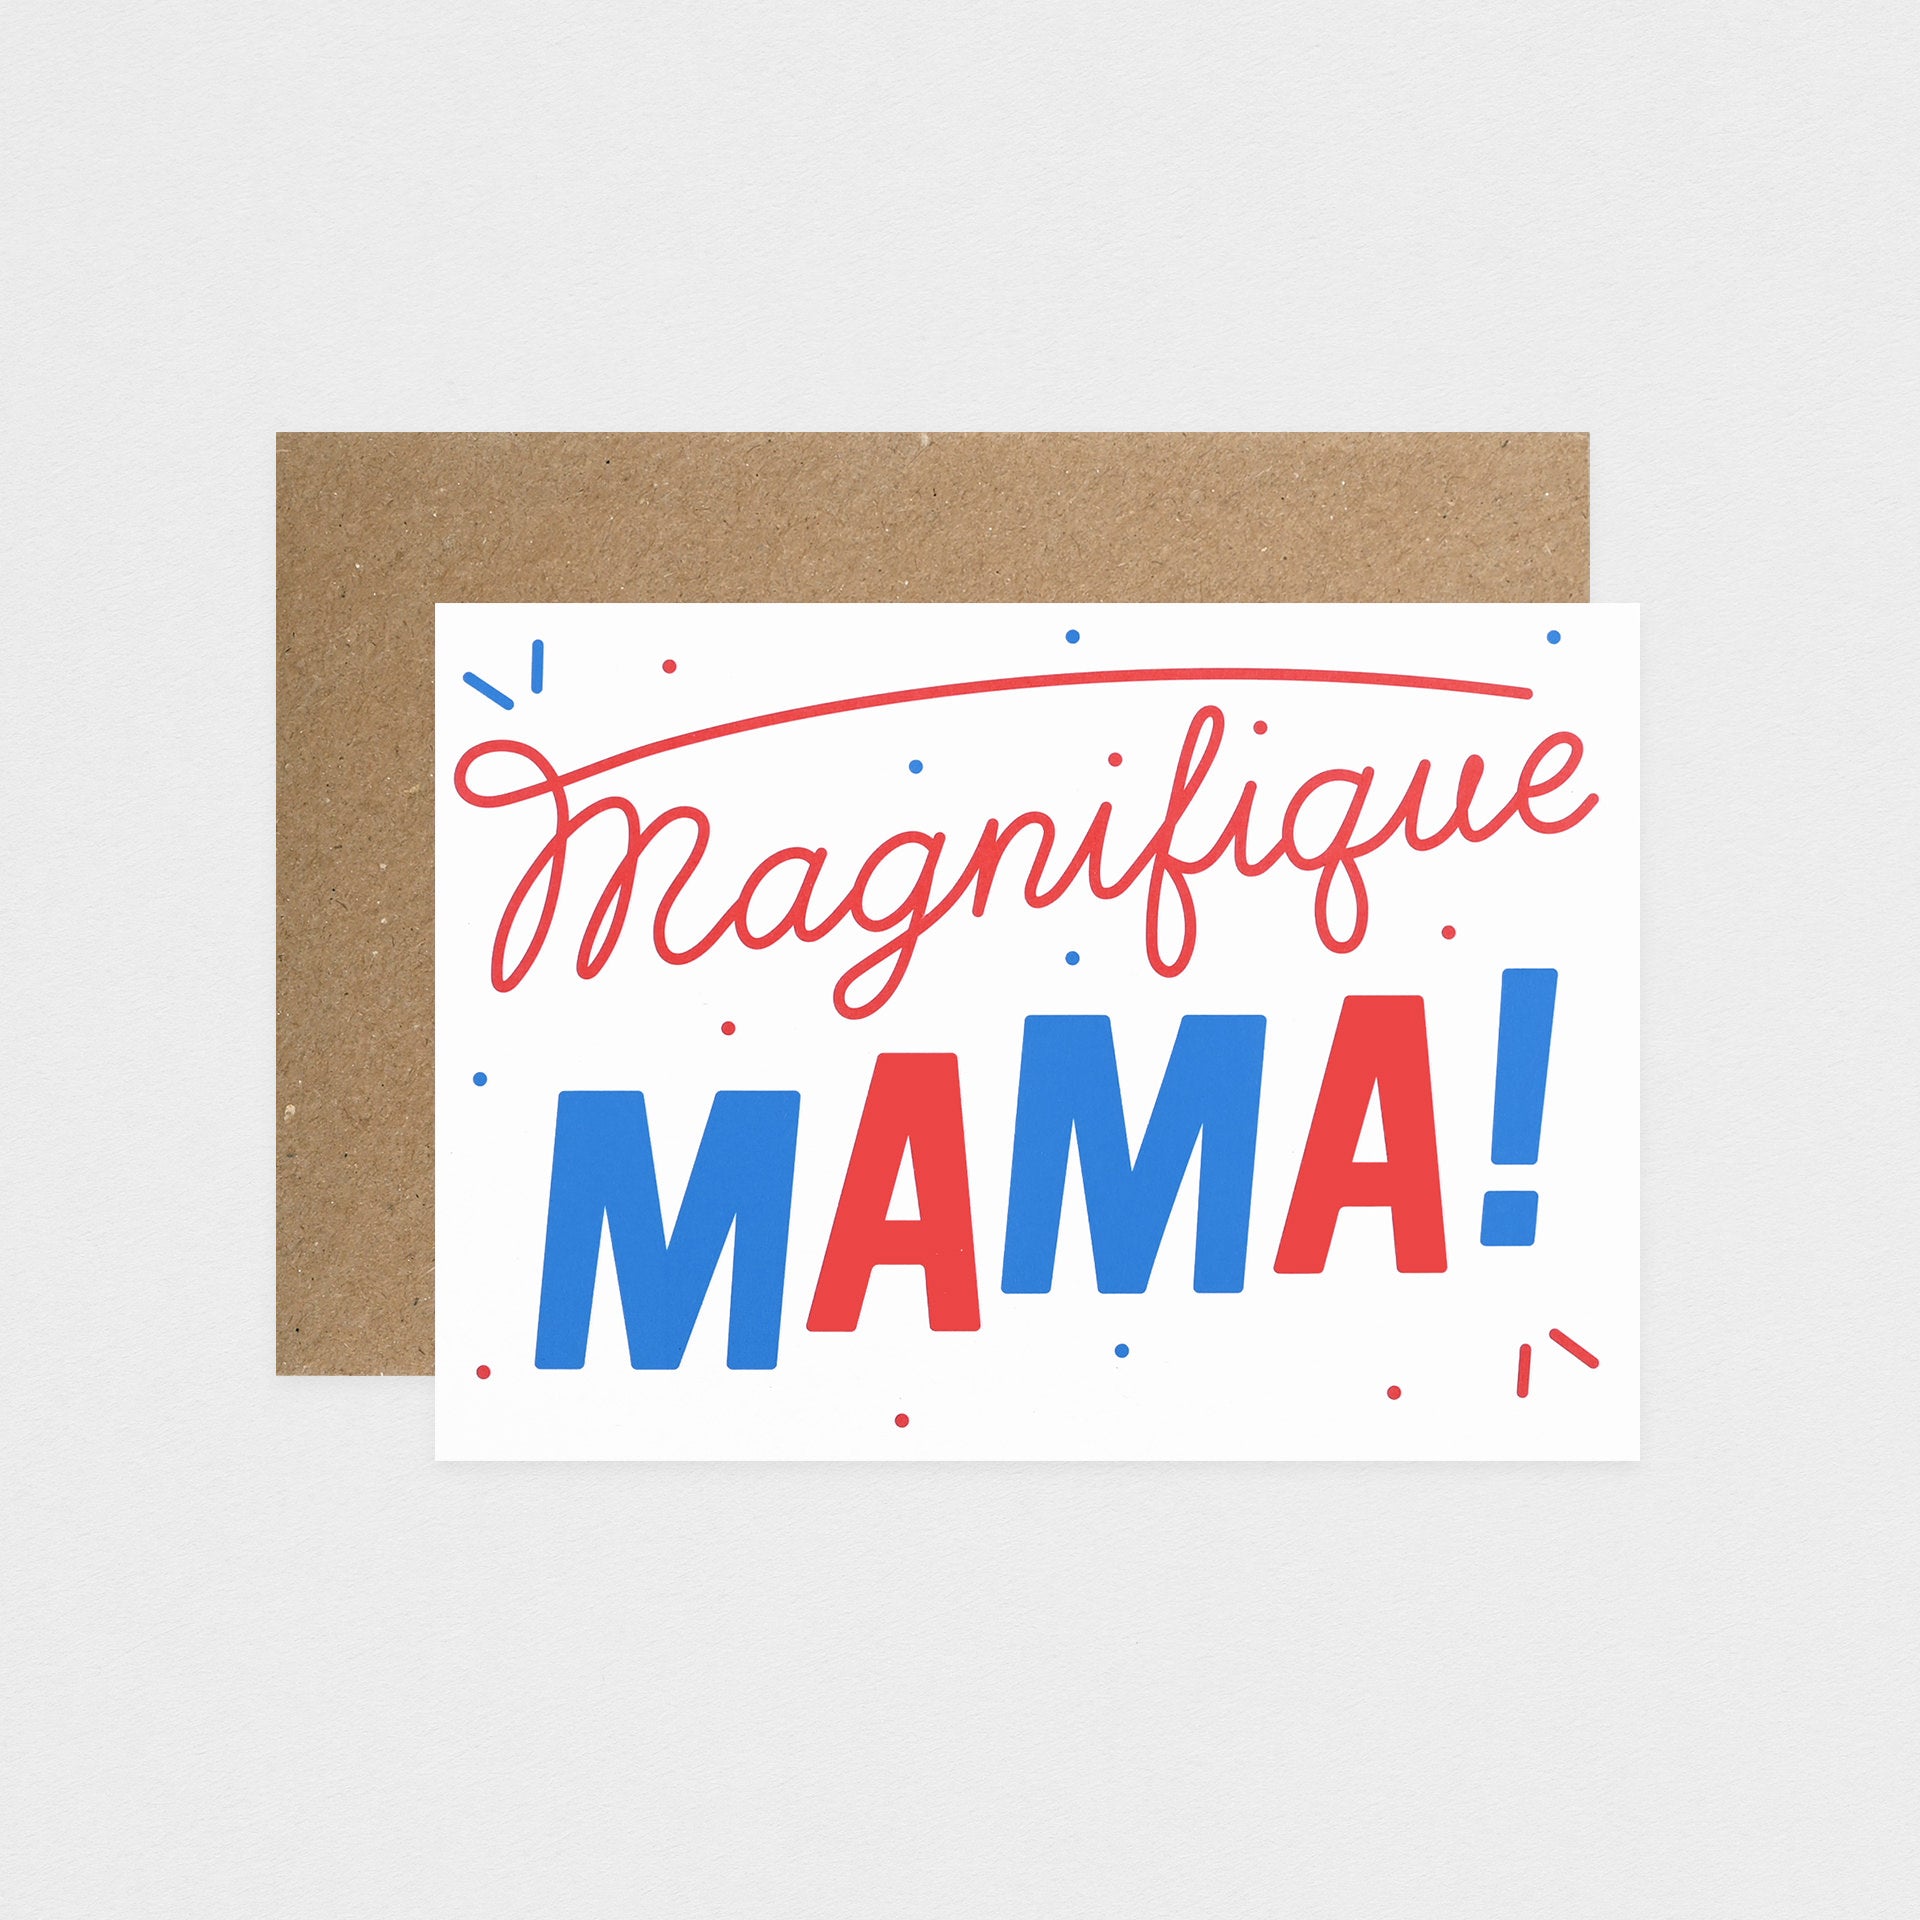 Crispin Finn Magnifique Mama Mother's Day Card 